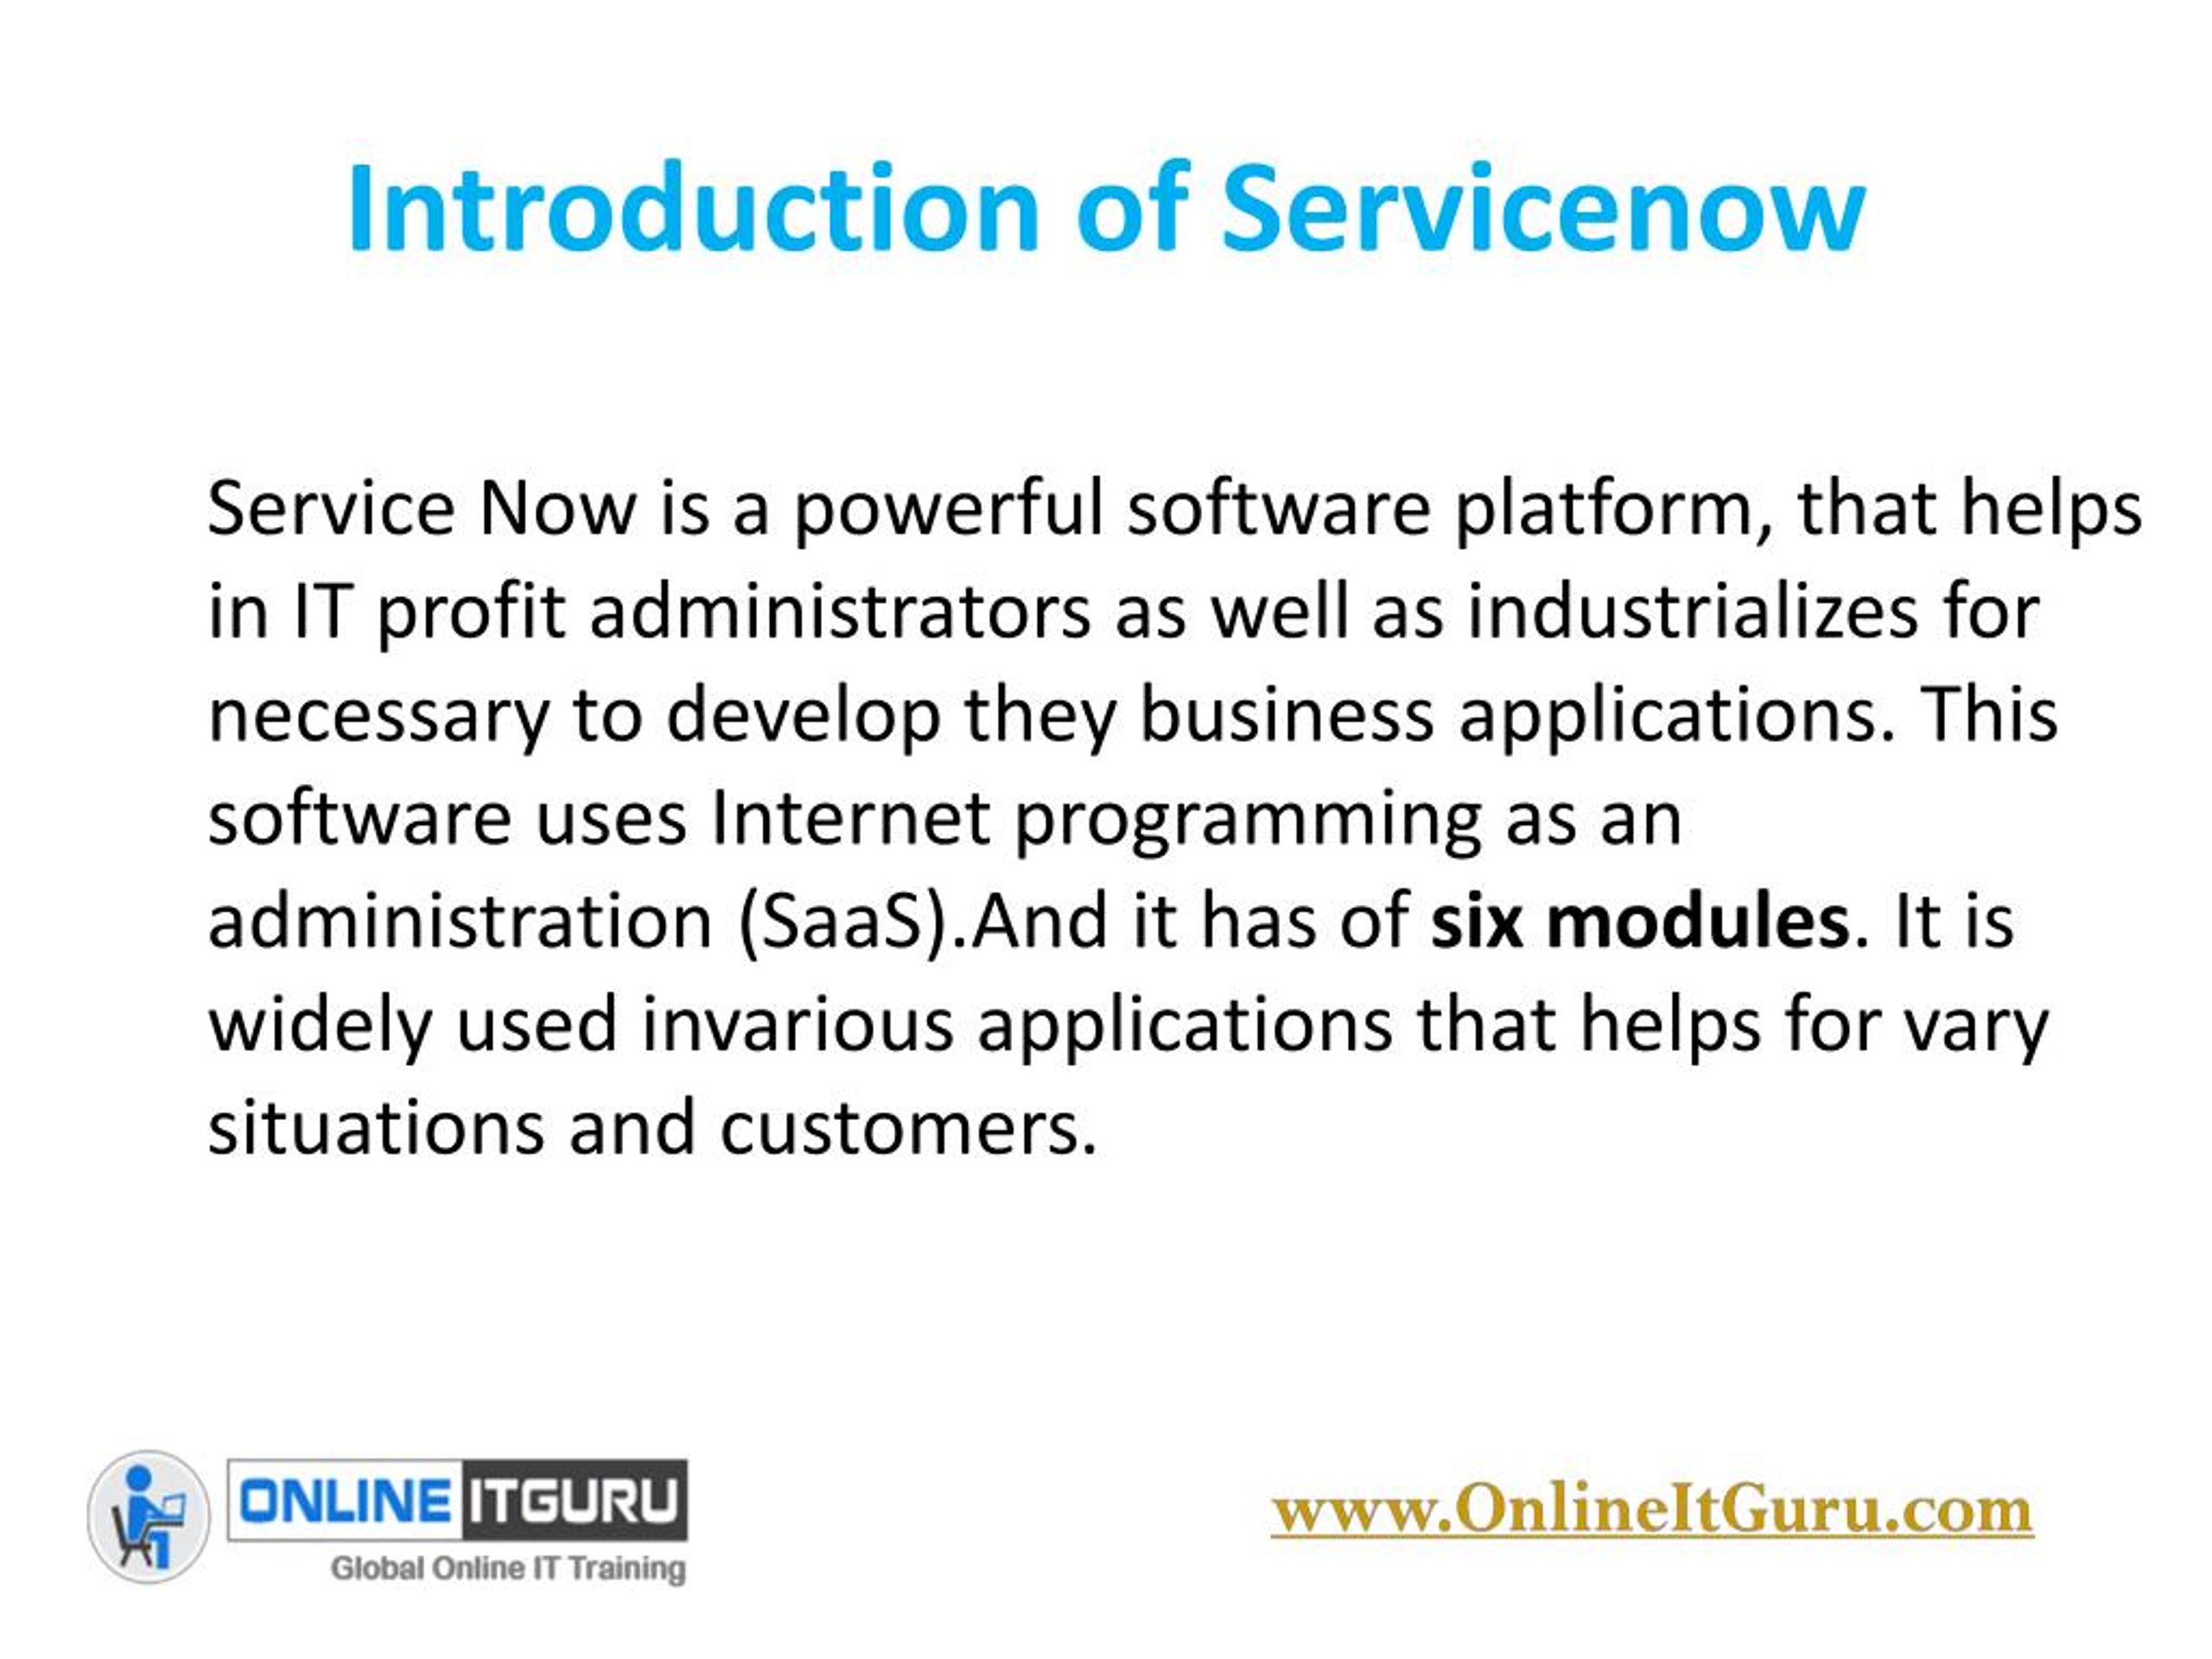 PPT Demo On servicenow online course PowerPoint Presentation, free download ID7643698